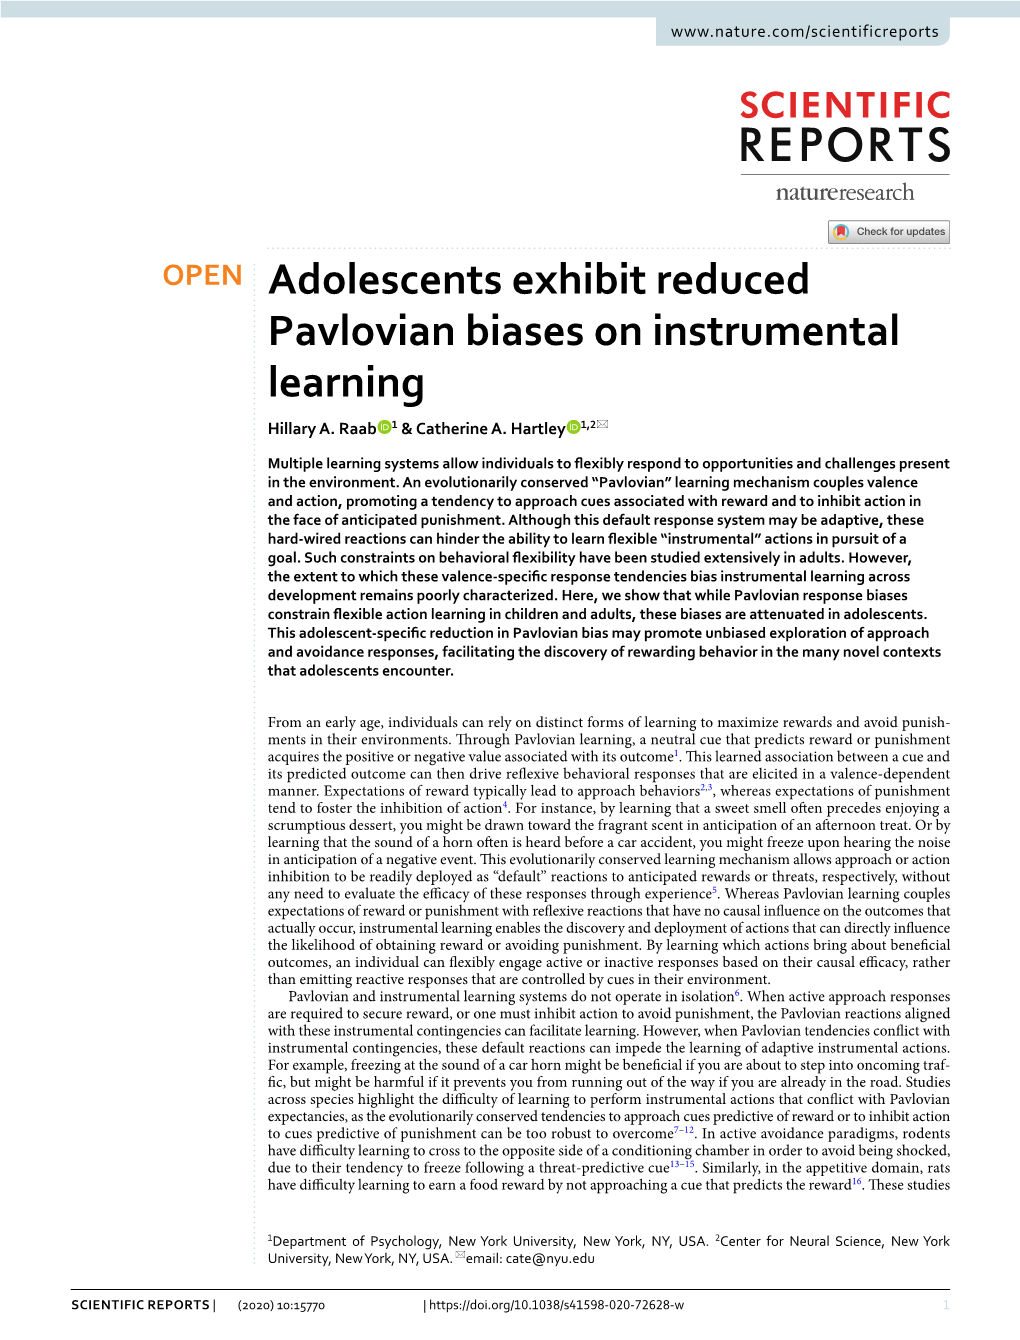 Adolescents Exhibit Reduced Pavlovian Biases on Instrumental Learning Hillary A